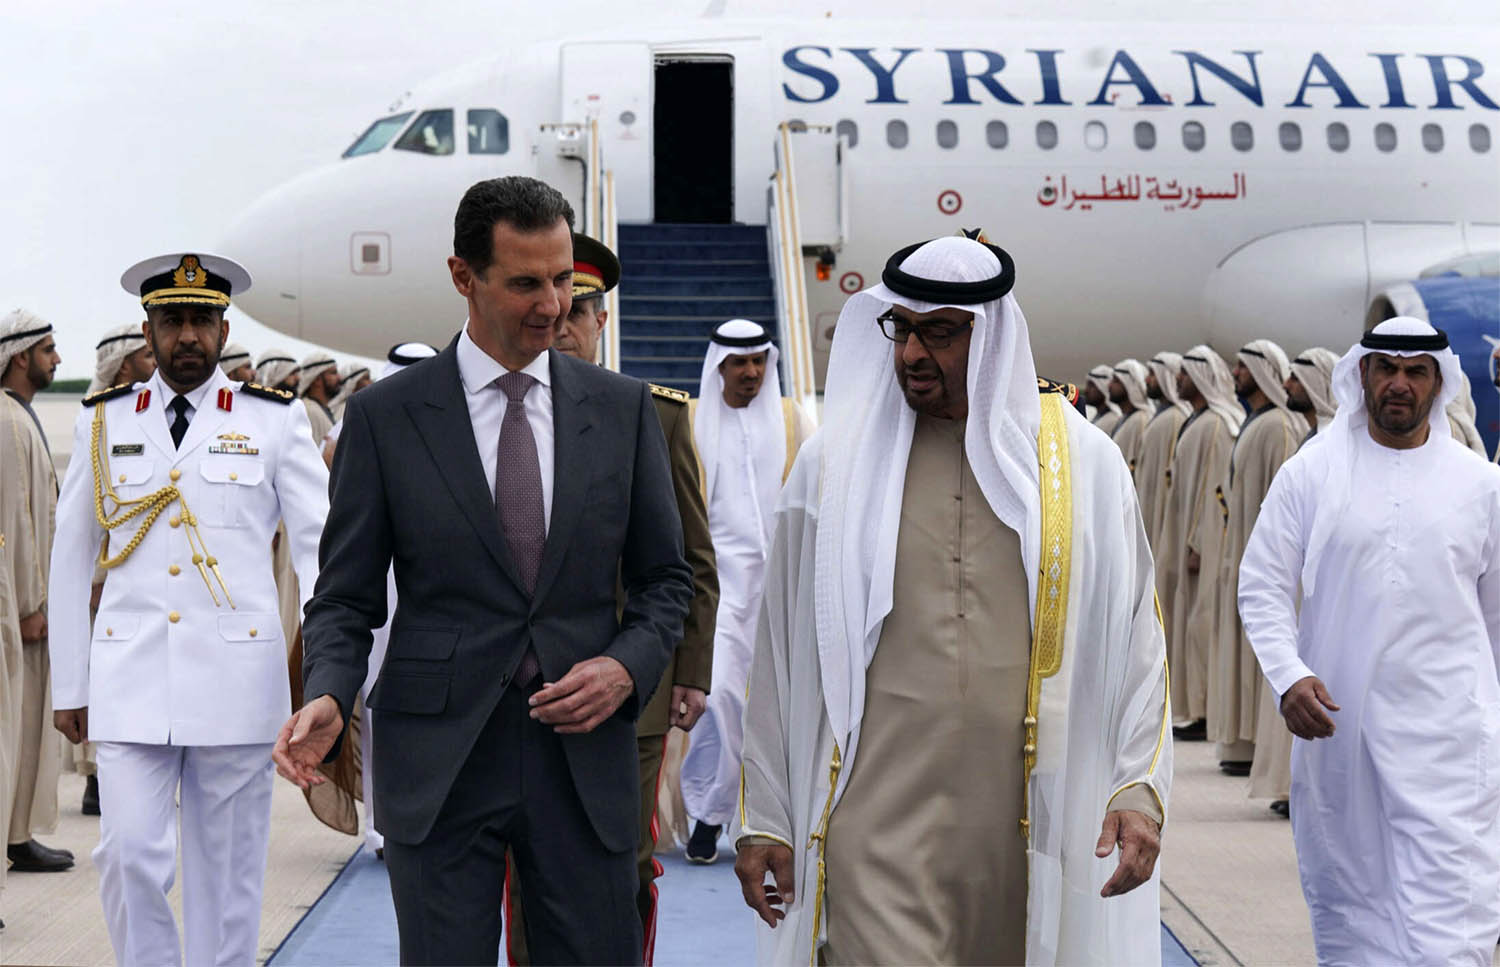 Assad visited the UAE last March